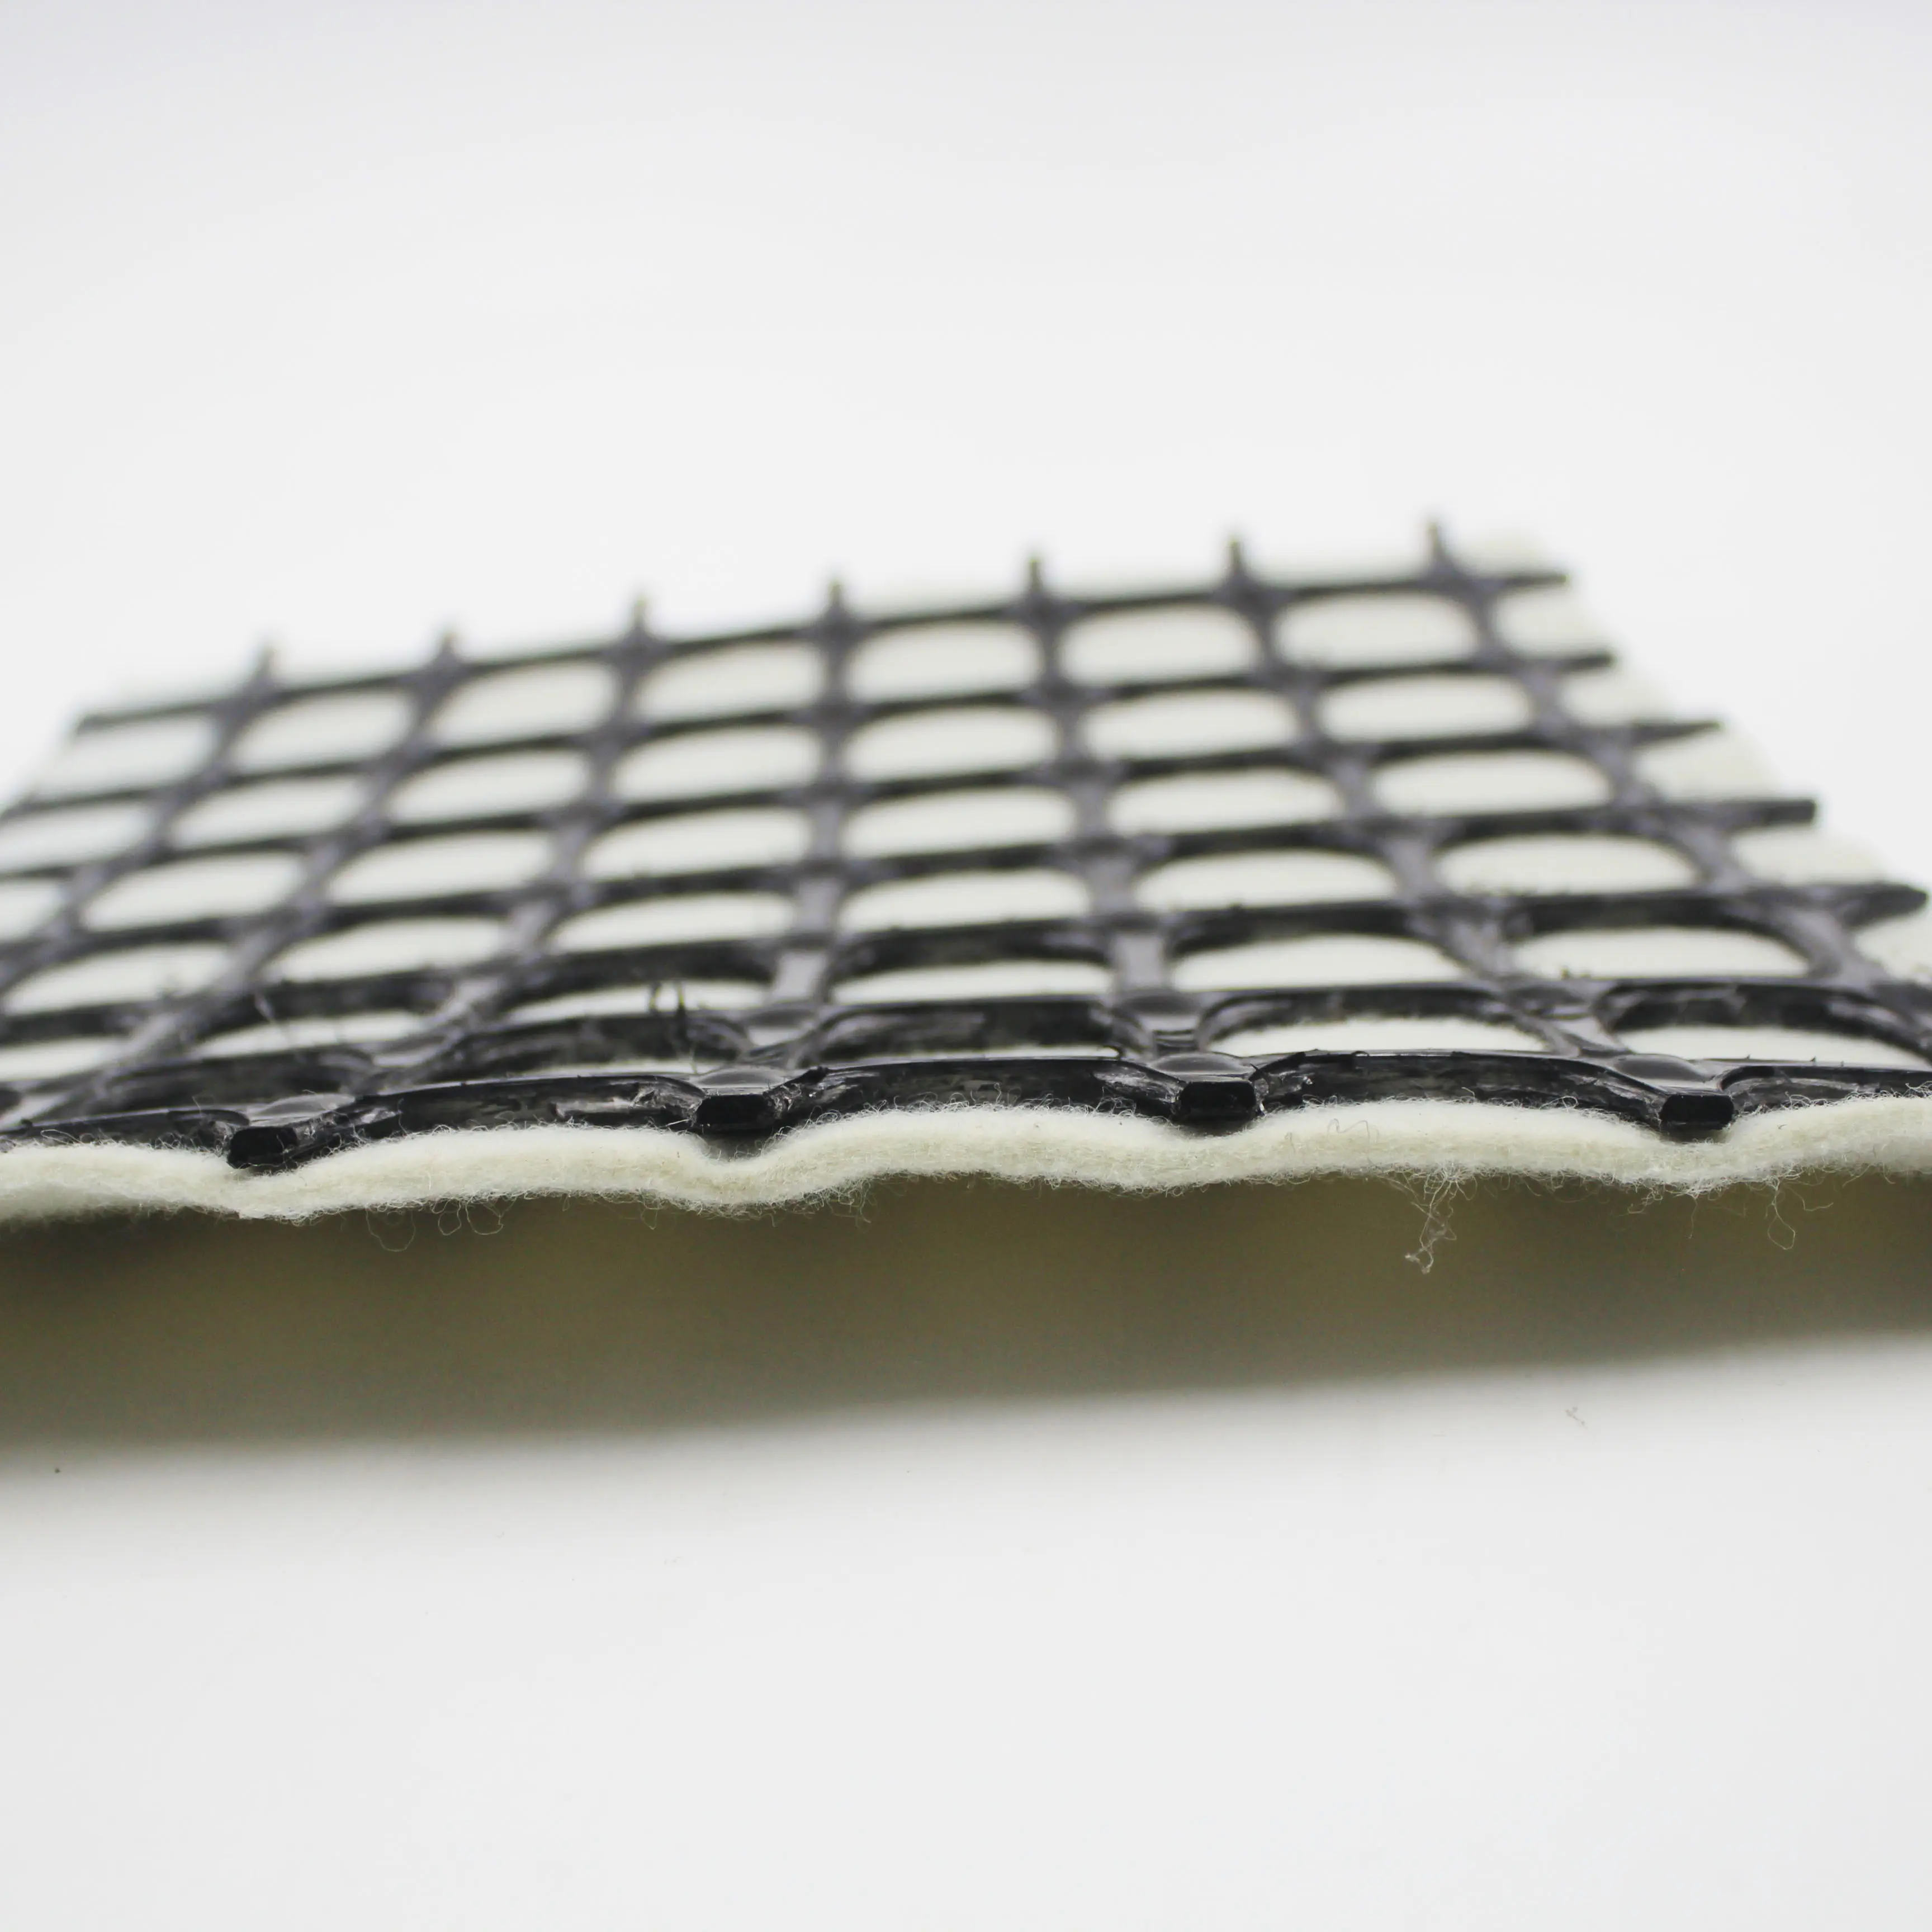 400g m2 geotextil nonwoven biaxial plastic geogrid composite geogrid for soil stabilization